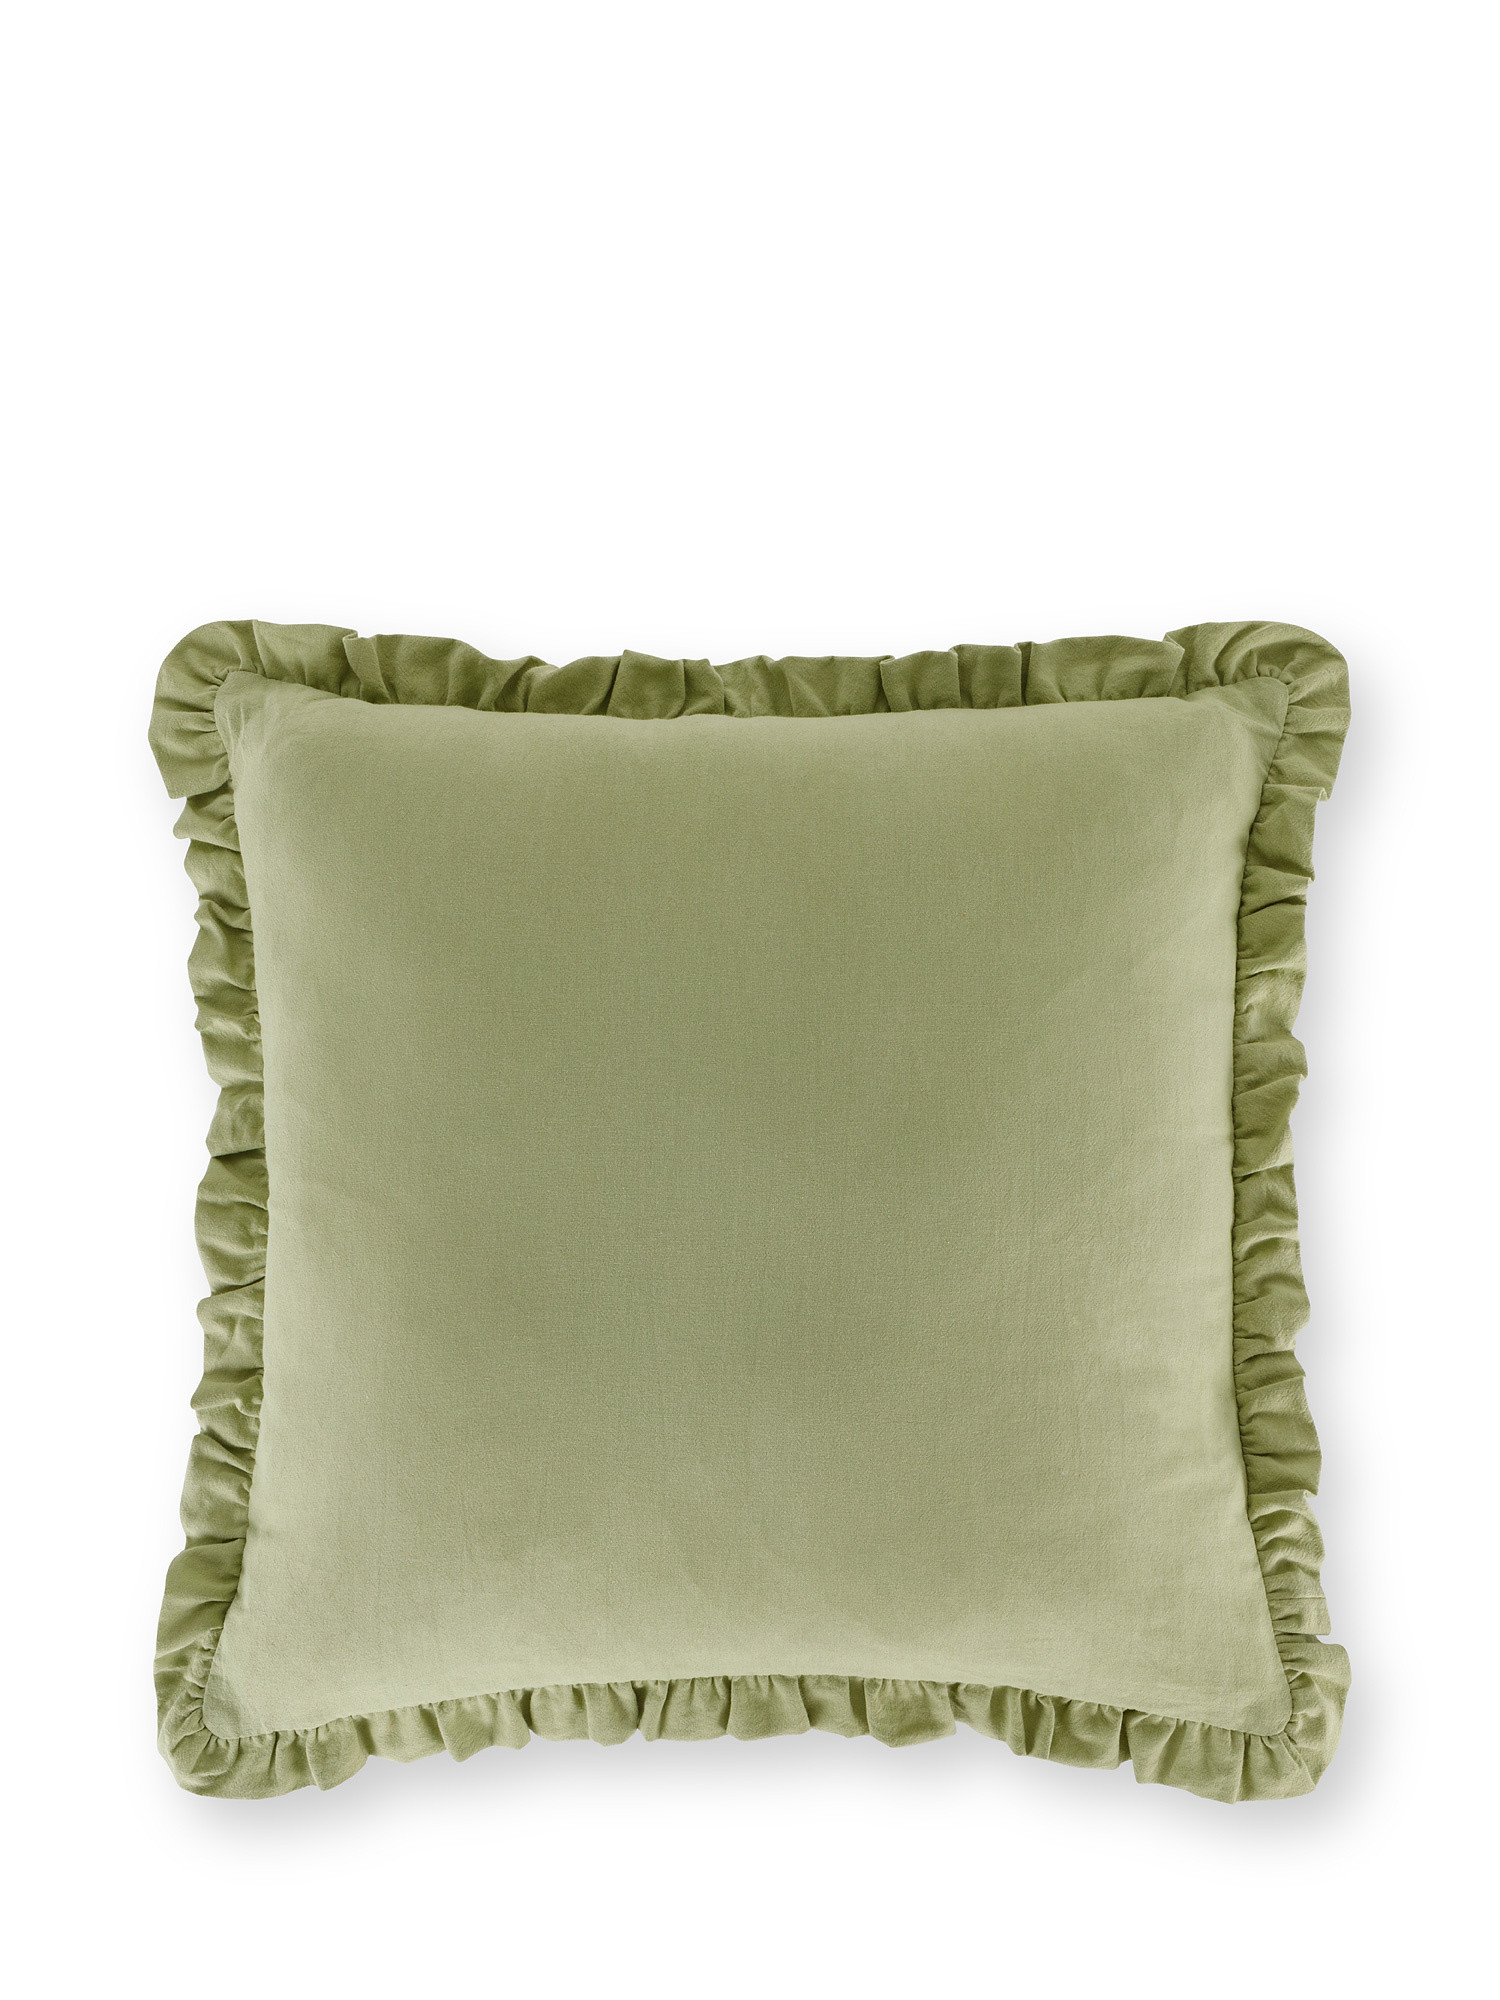 Cotton cushion with ruffles 45x45cm, Green, large image number 0